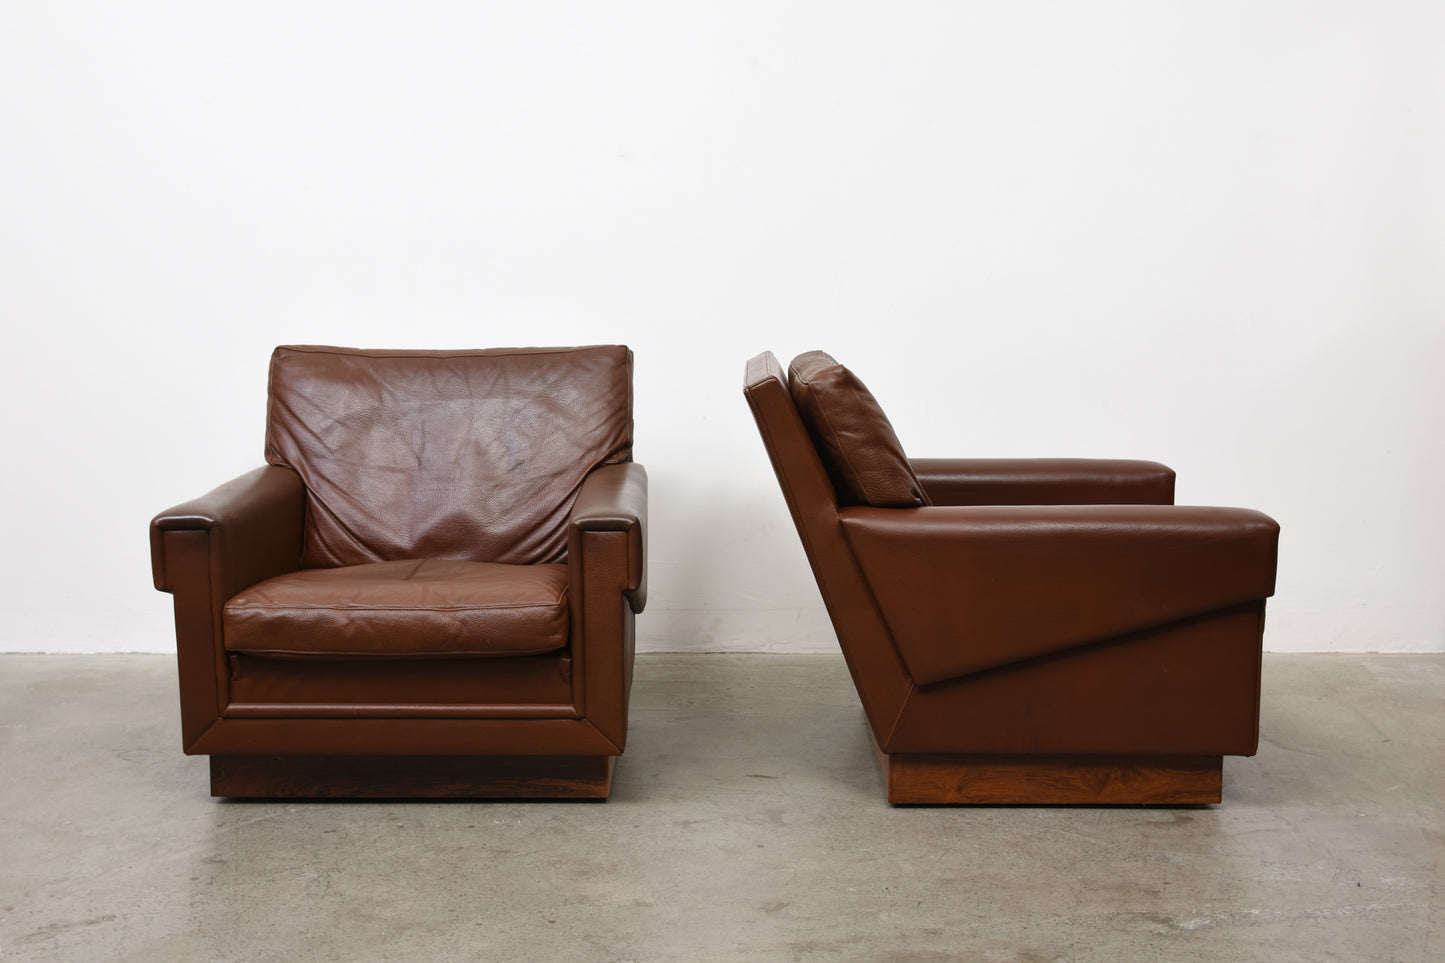 Two available: 1970s Danish leather loungers